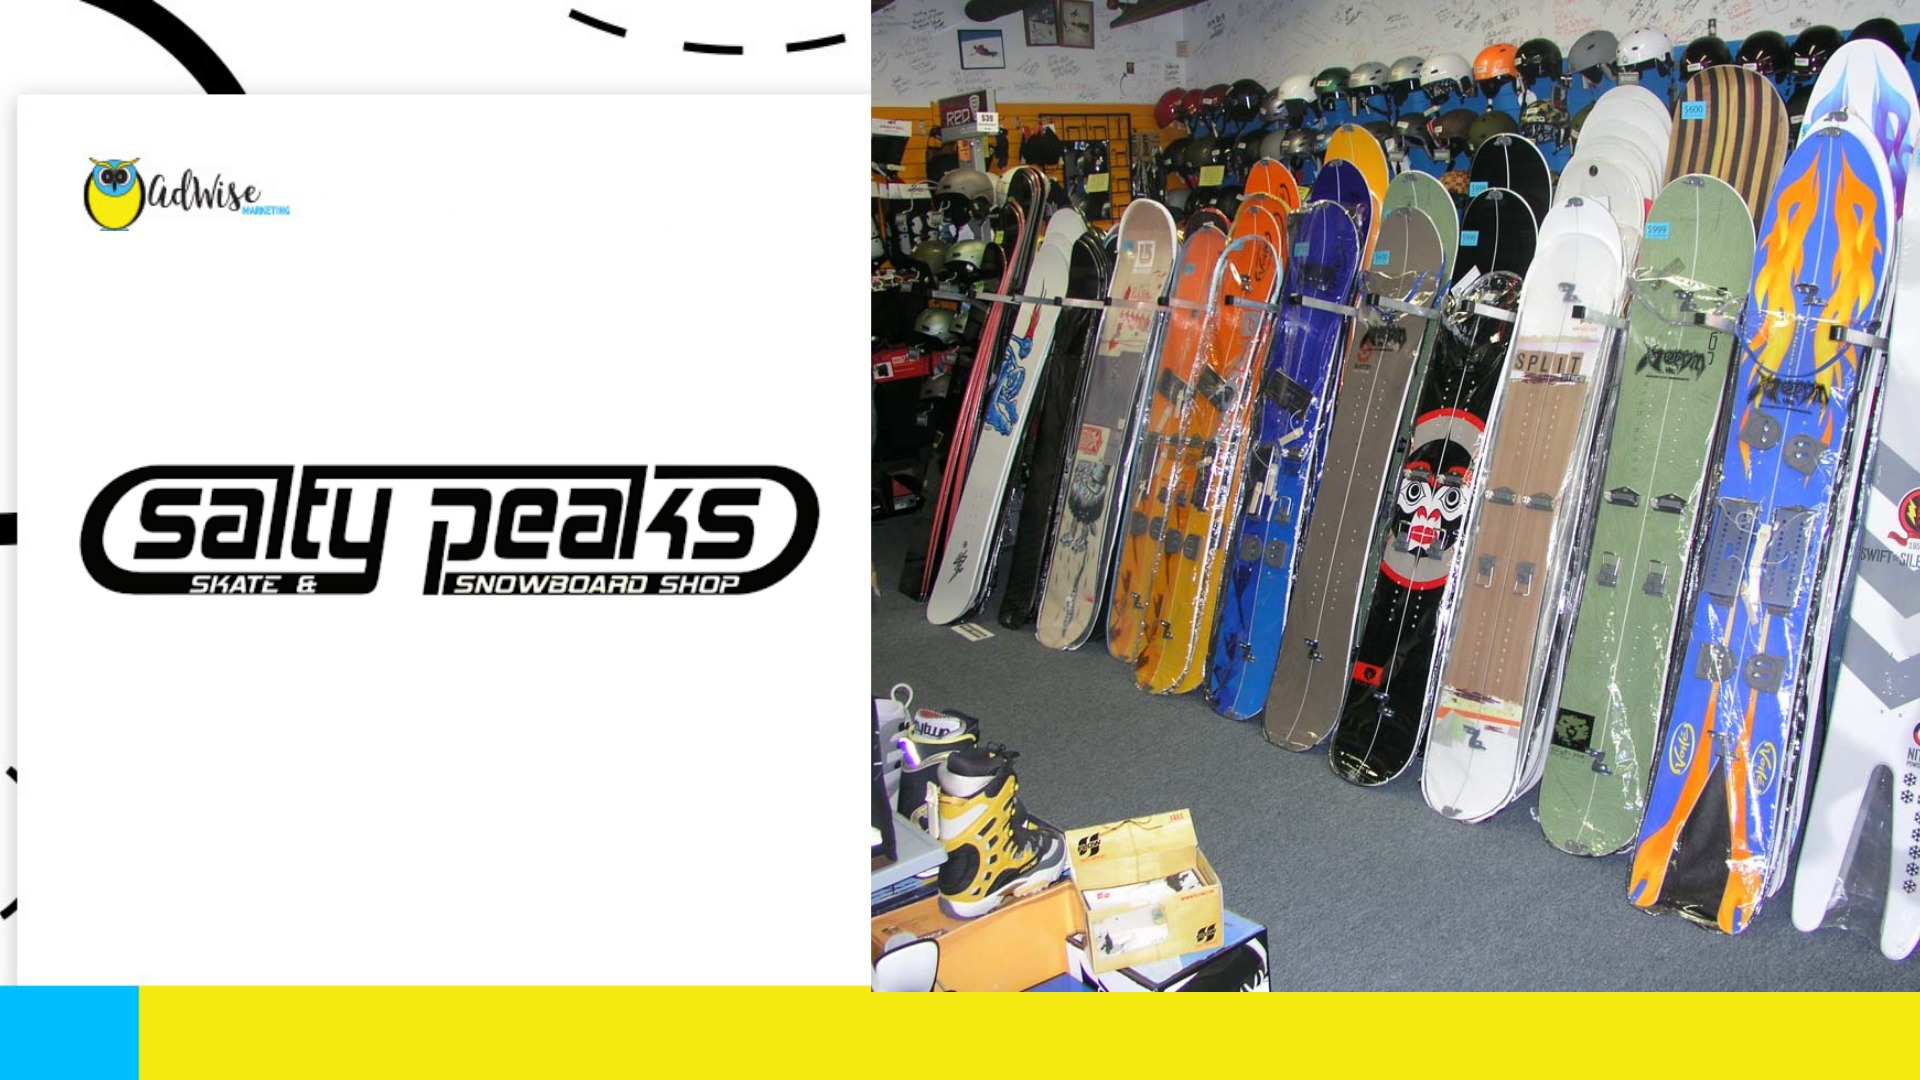 Get Ready For The Snow with Salty Peaks Snowboard Specialty Shop!